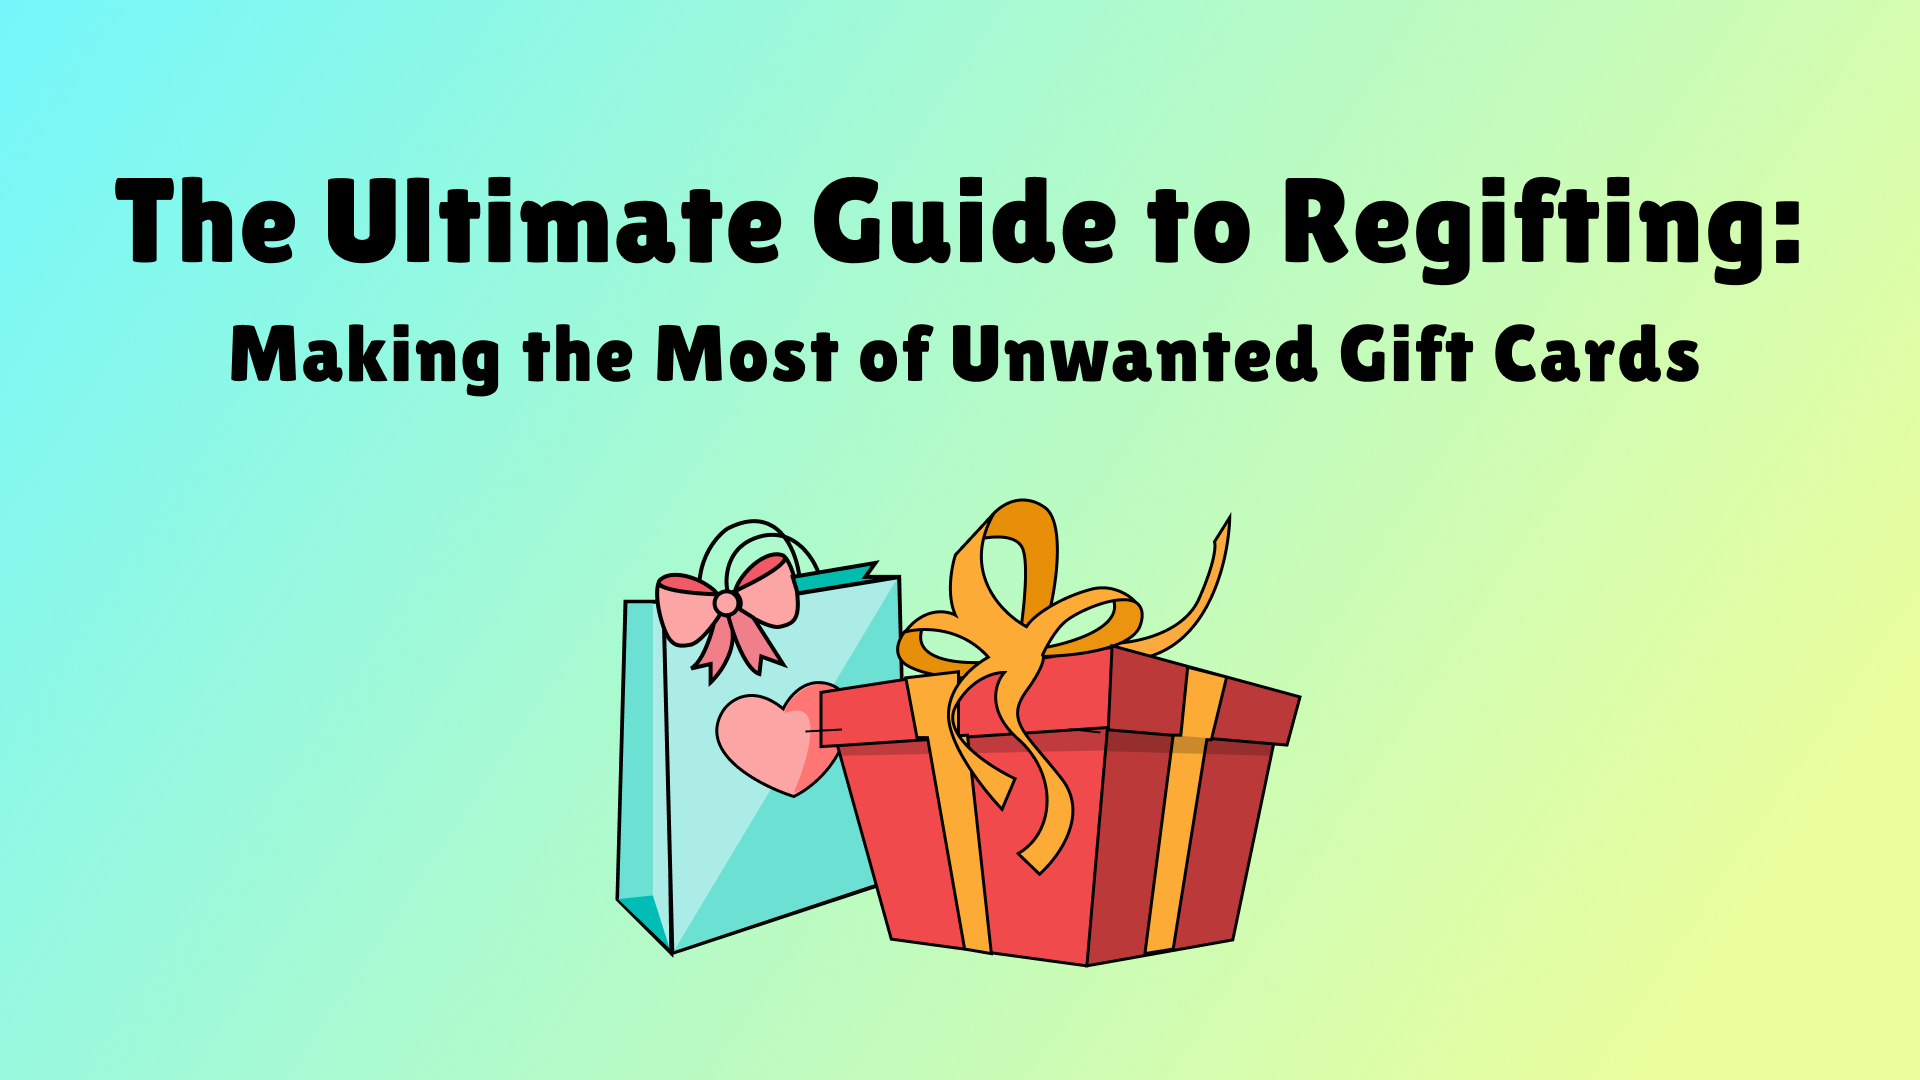 The Ultimate Guide to Regifting: Making the Most of Unwanted Gift Cards